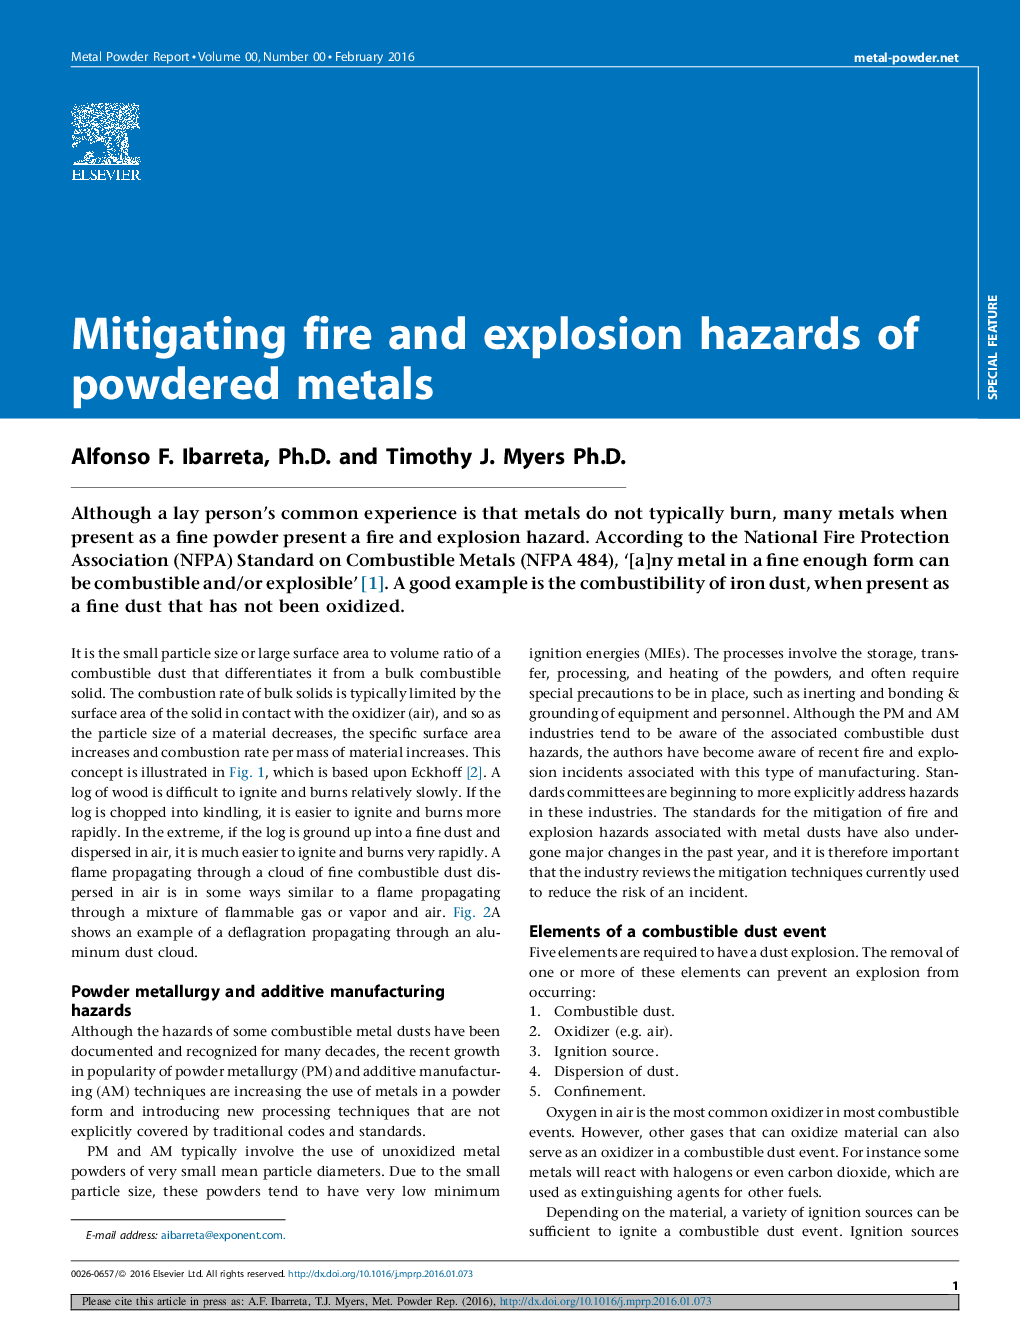 Mitigating fire and explosion hazards of powdered metals